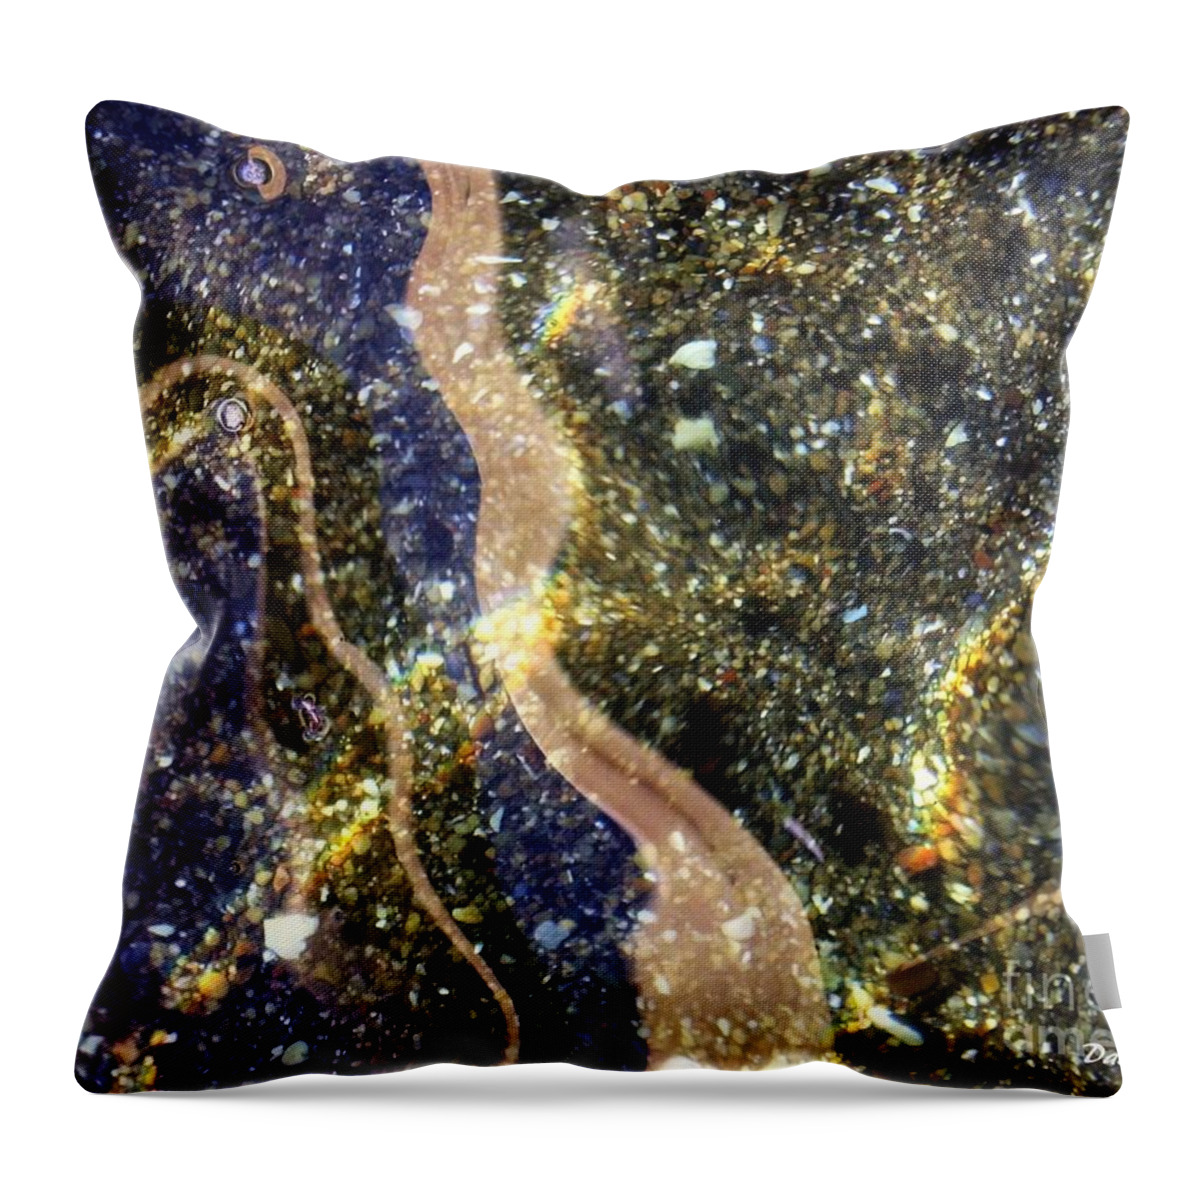 Water Throw Pillow featuring the digital art Shallow Water by Dale  Ford